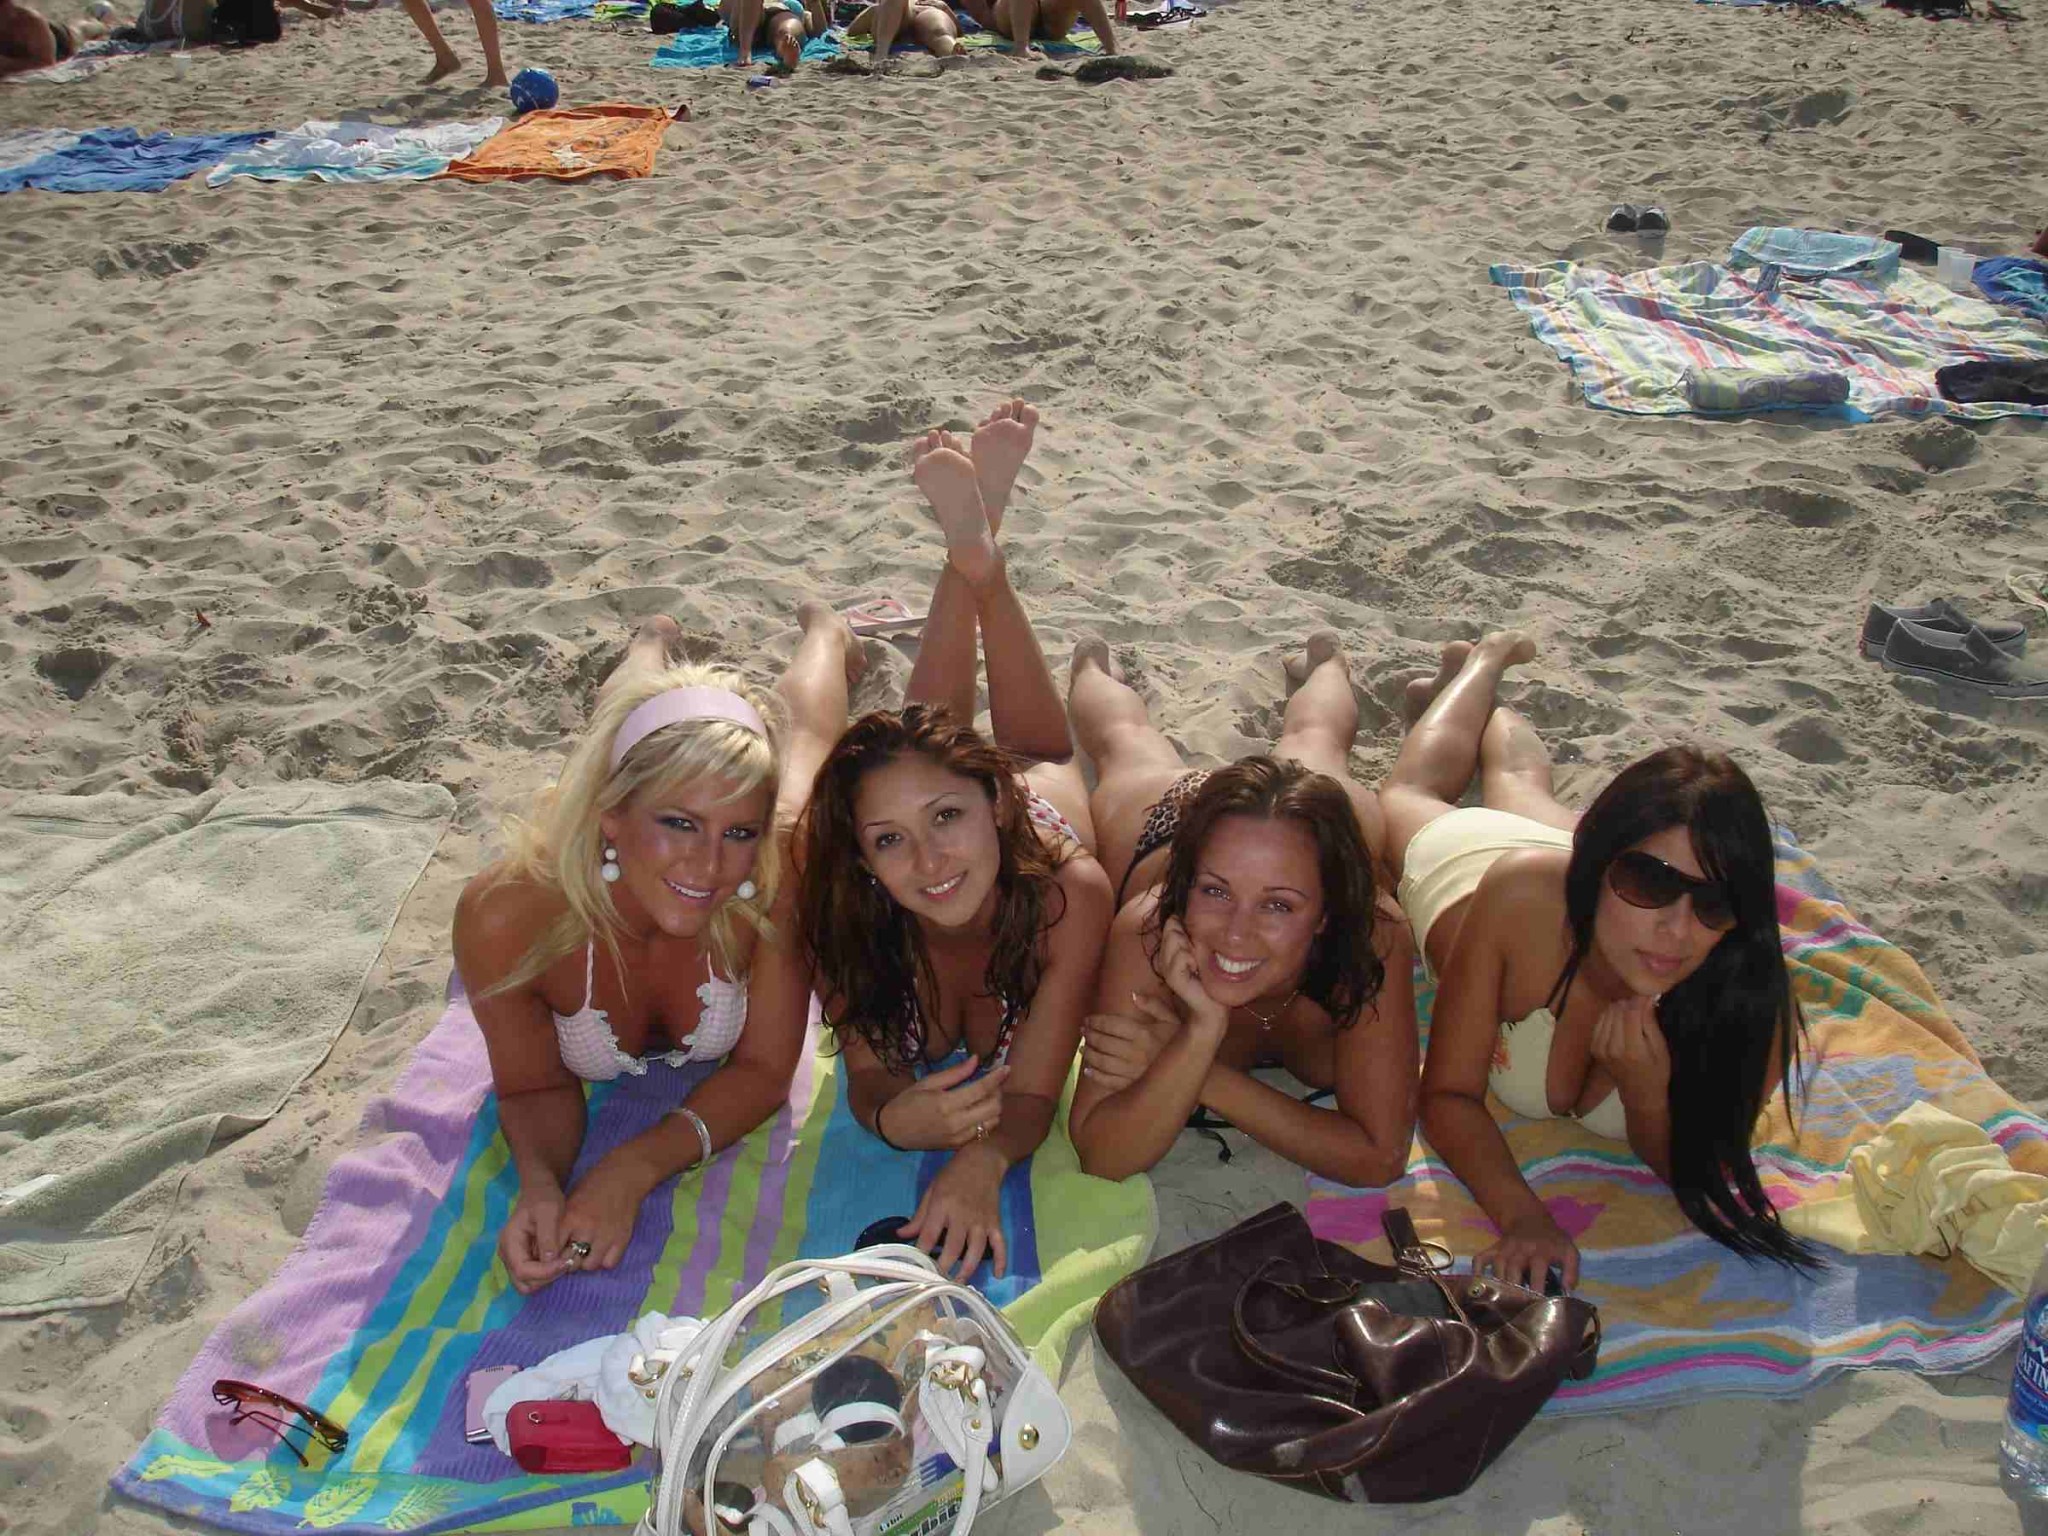 Hookers posing and spreading their legs #67941000